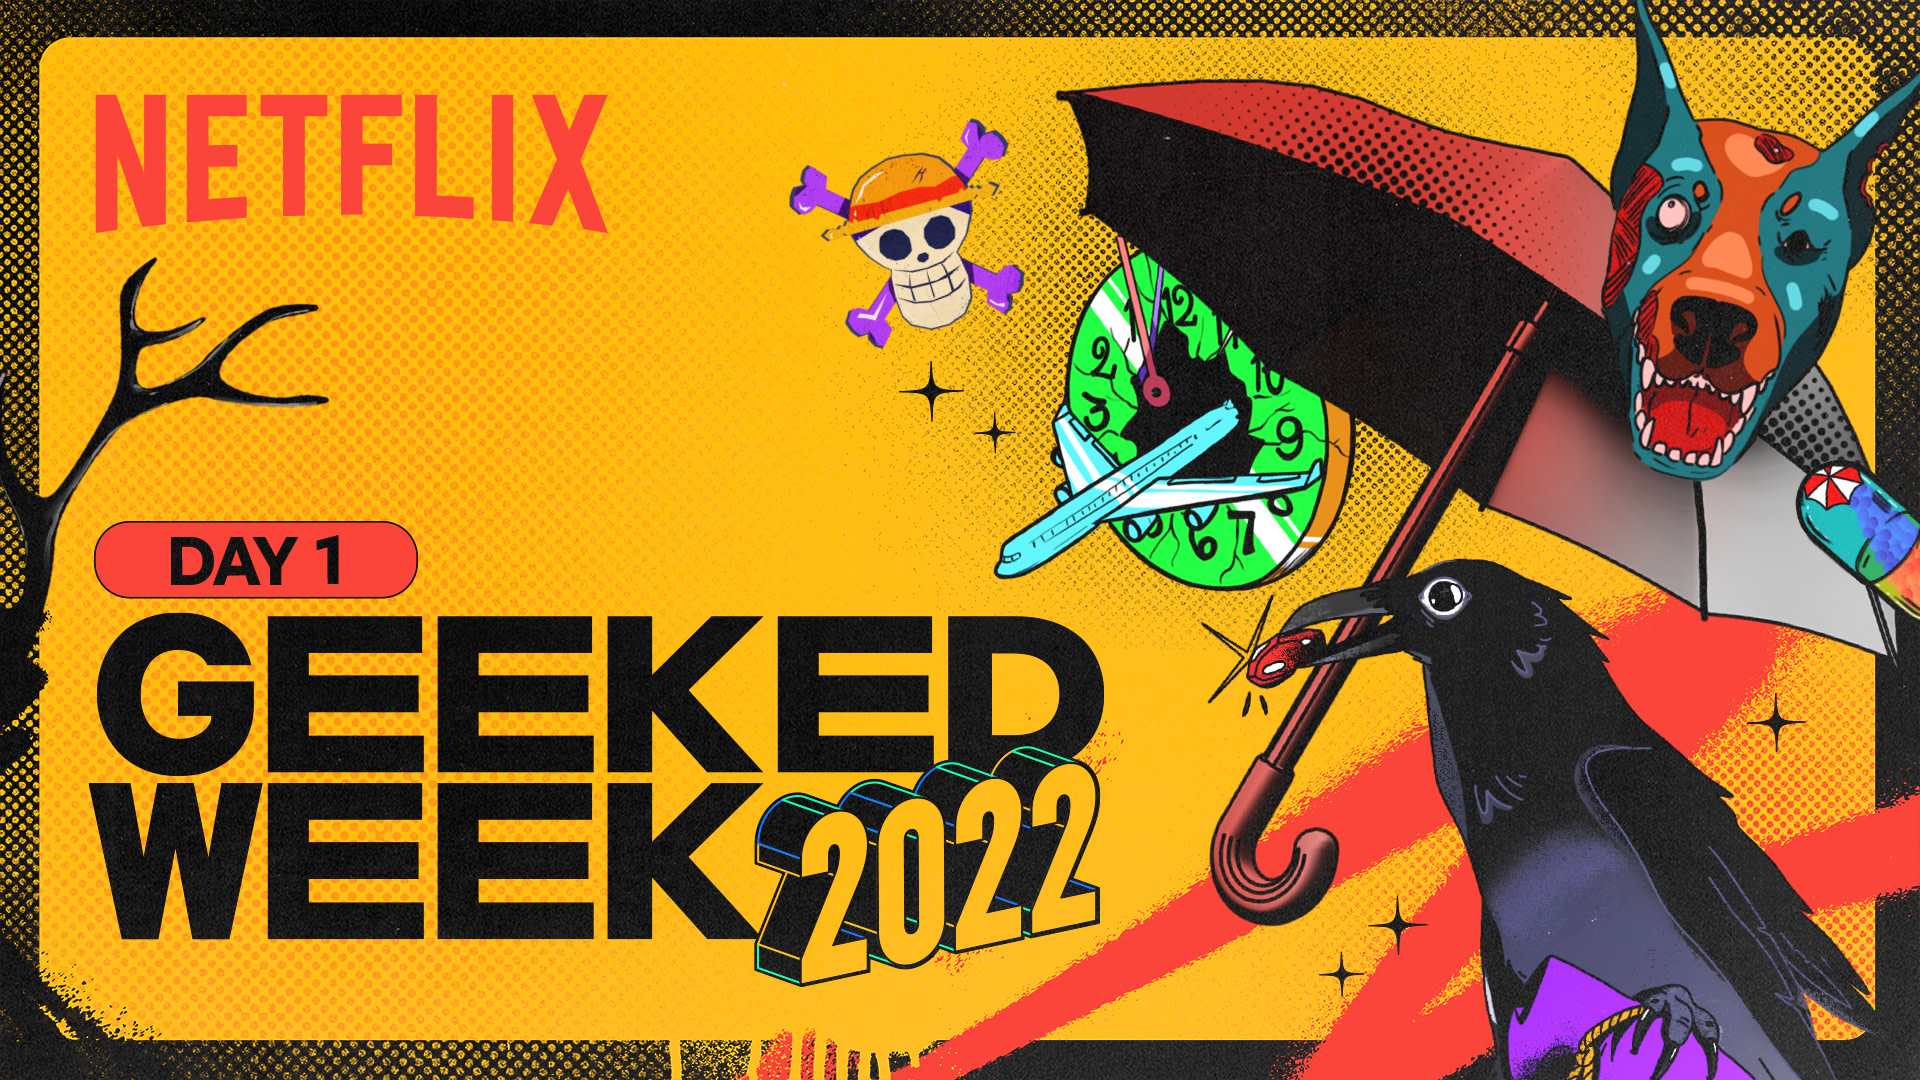 Geeked Week 2022 Recap: All the News and Sneak Peeks from Series Day -  About Netflix